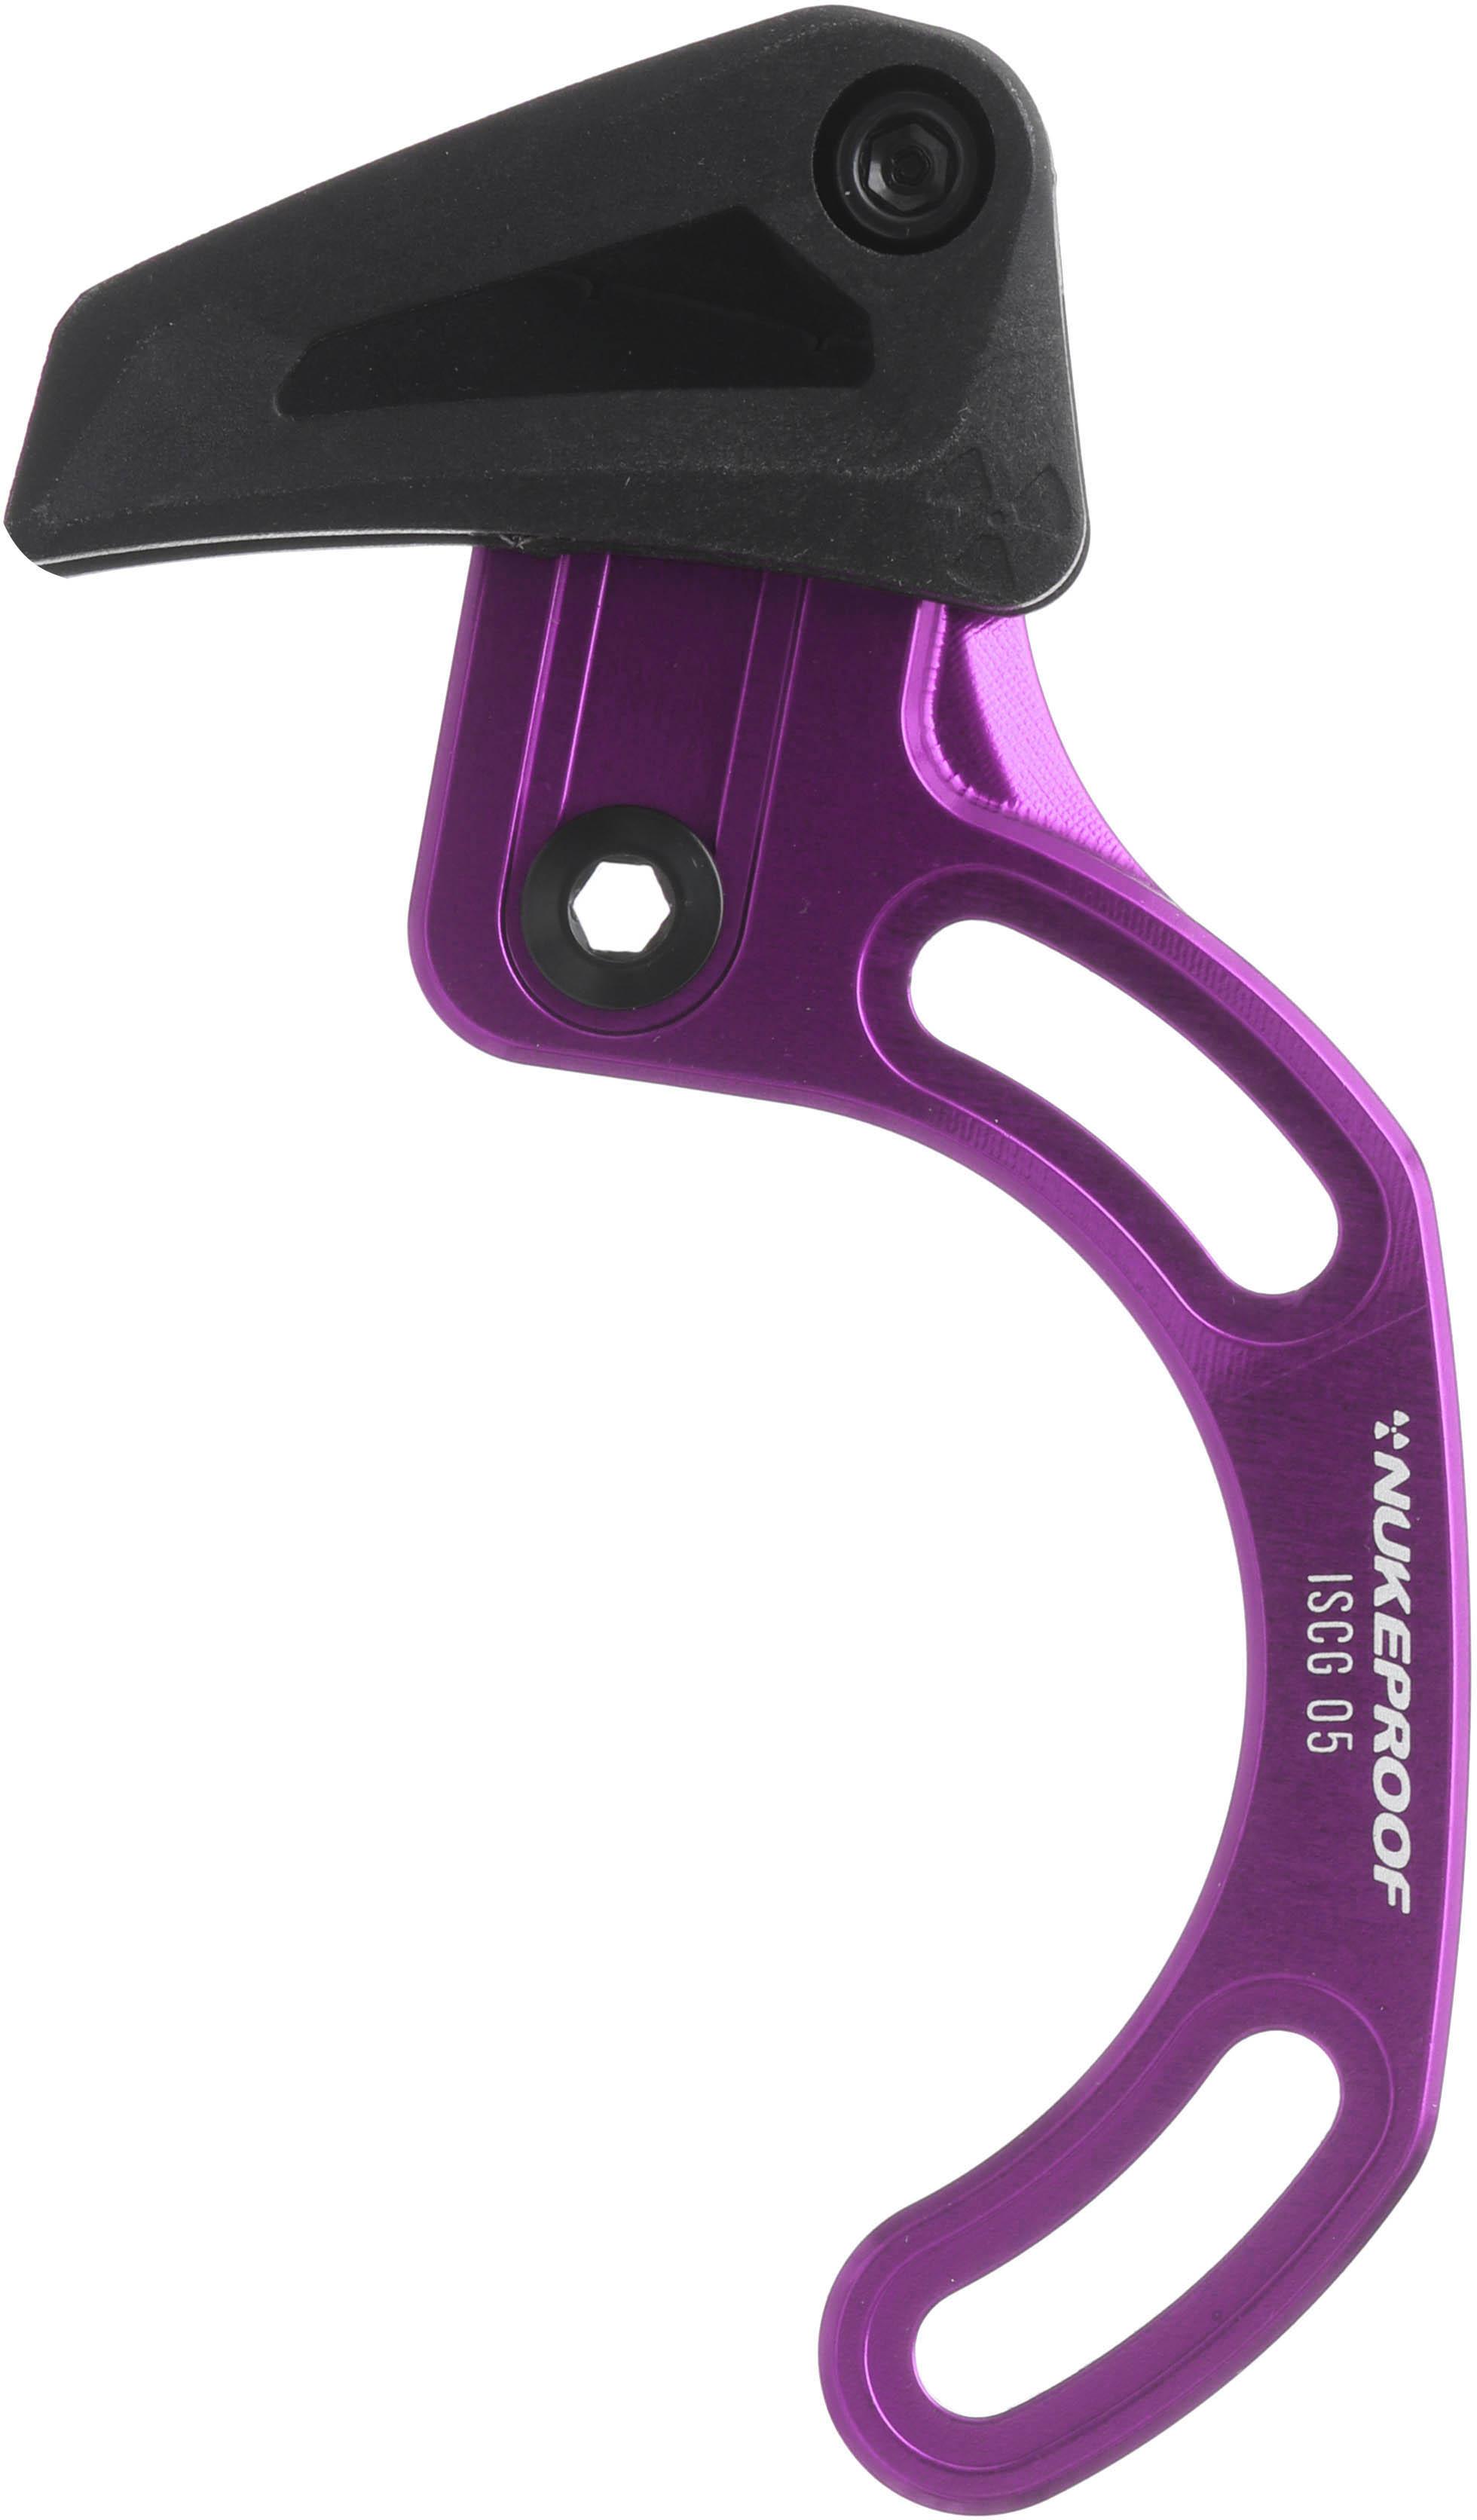 Nukeproof Chain Guide Iscg 05 Top Guide  Purple/black